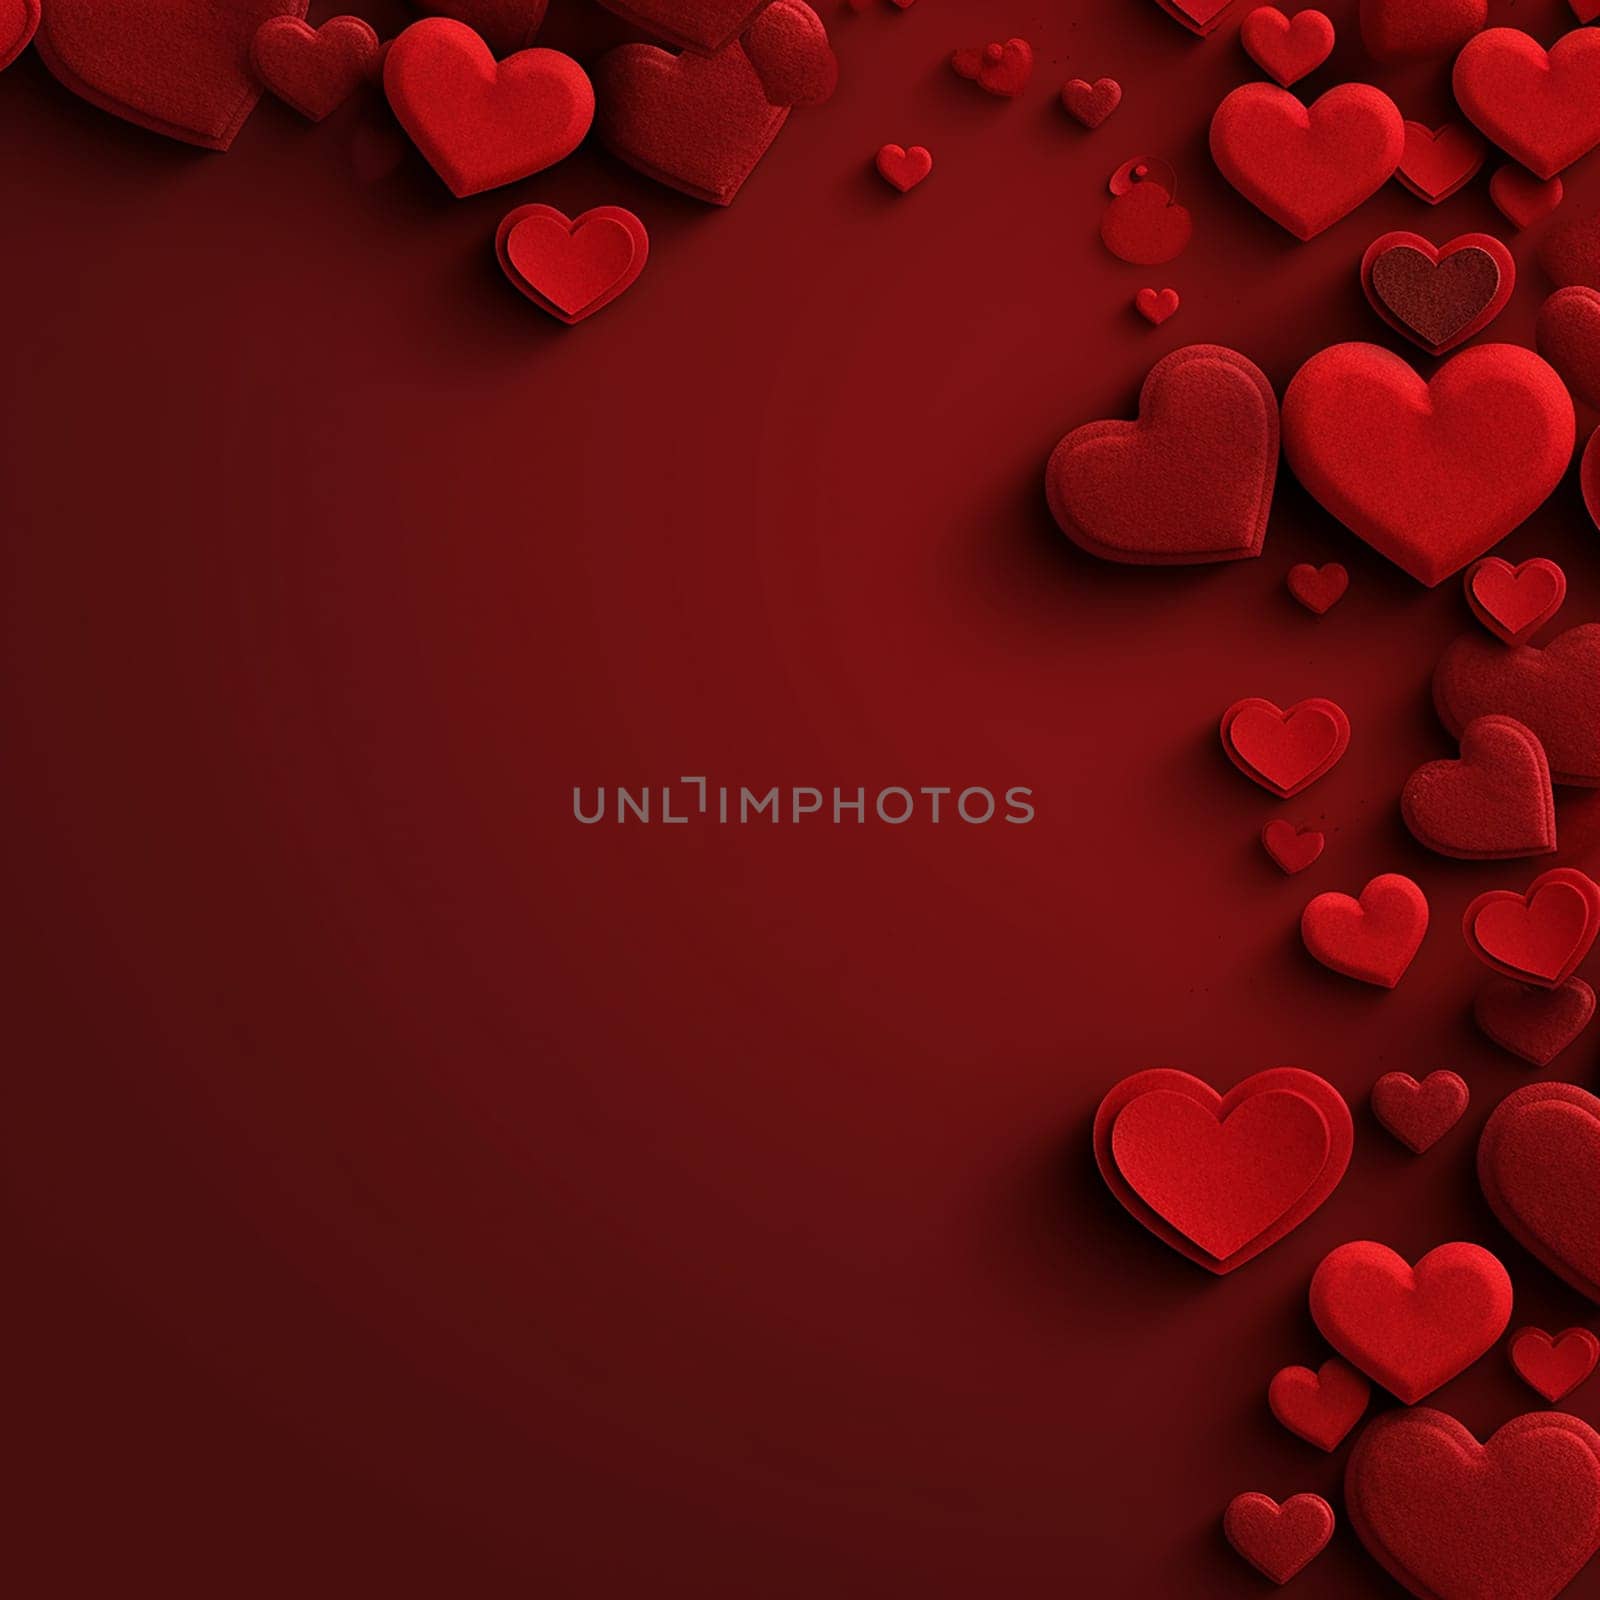 Variety of red hearts on a dark red background, symbolizing love and romance. by Hype2art